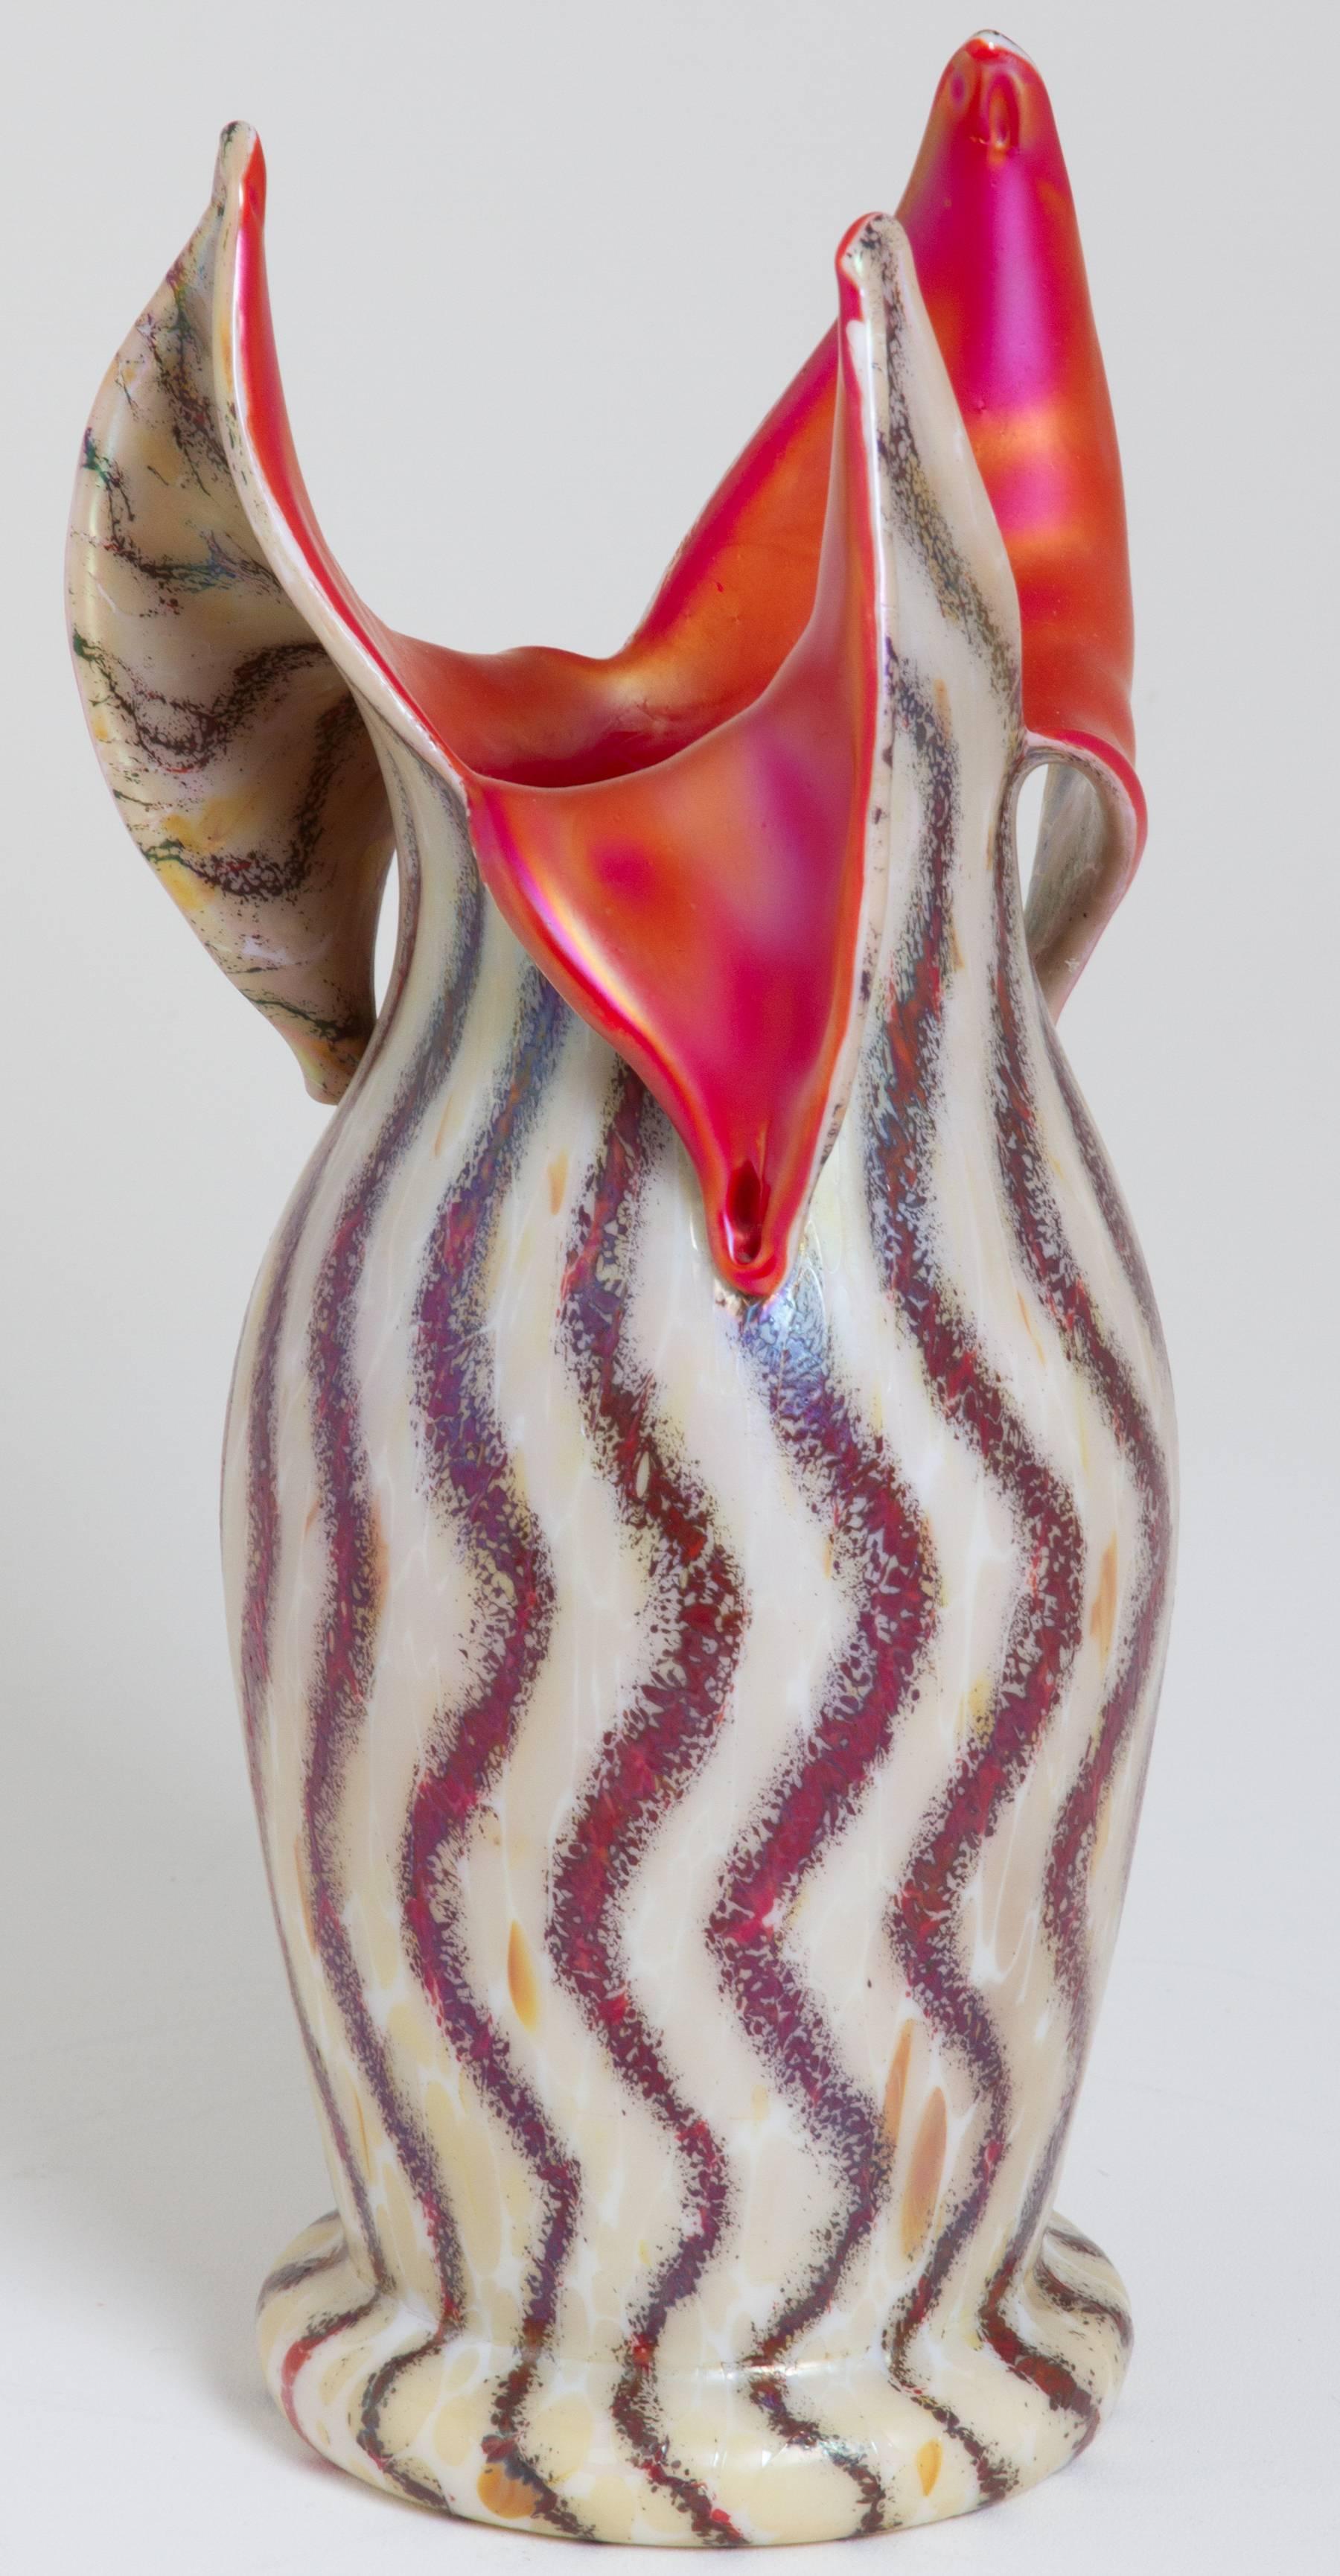 This is a striking Czech vase, having a fabulous iridescent golden orange interior and an optical striped exterior. The vase has a polished pontil and the lip of the vase is open like three petals. It looks like it is on fire when in the light.